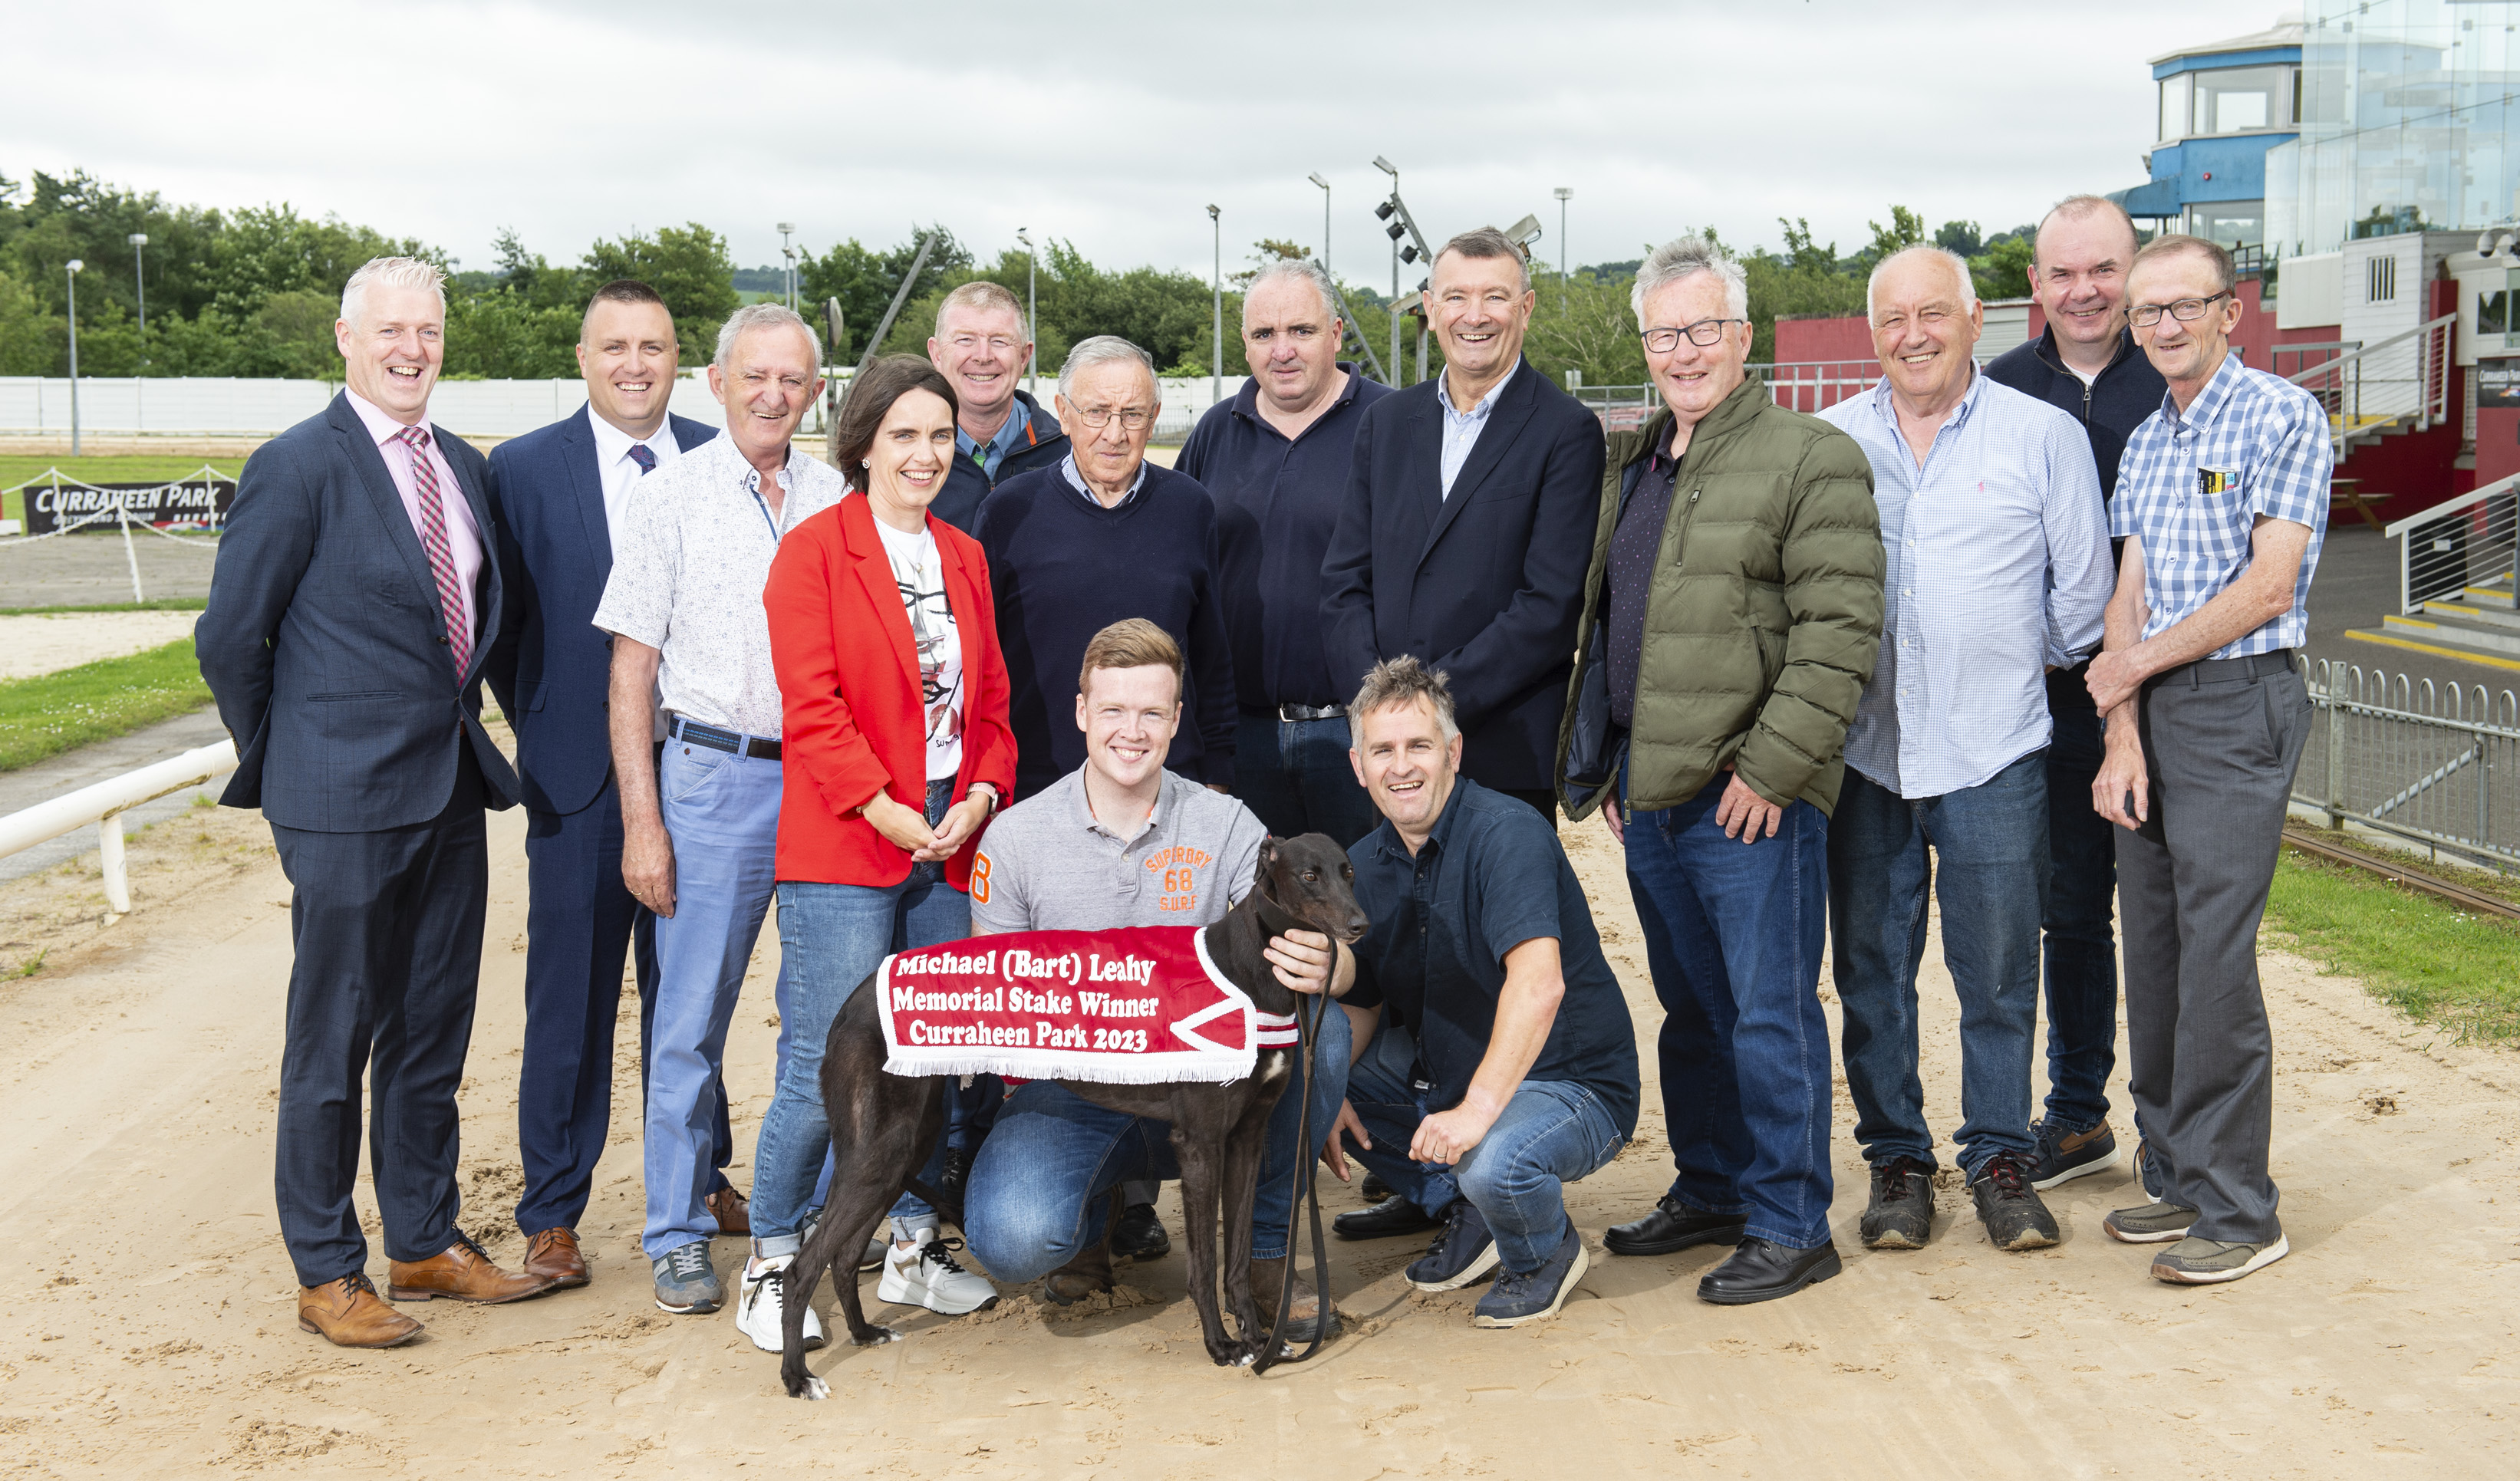 Jimmy Barry Murpy joined Bart’s brother and father, Donal Leahy and Liam Leahy, and William Coogan, John Linehan and Pat Kiely, friends and supporters, in Curraheen Park to make the announcement. The event will run in conjunction with the Irish Laurels which begins in September, with the Final on Saturday 14th October.